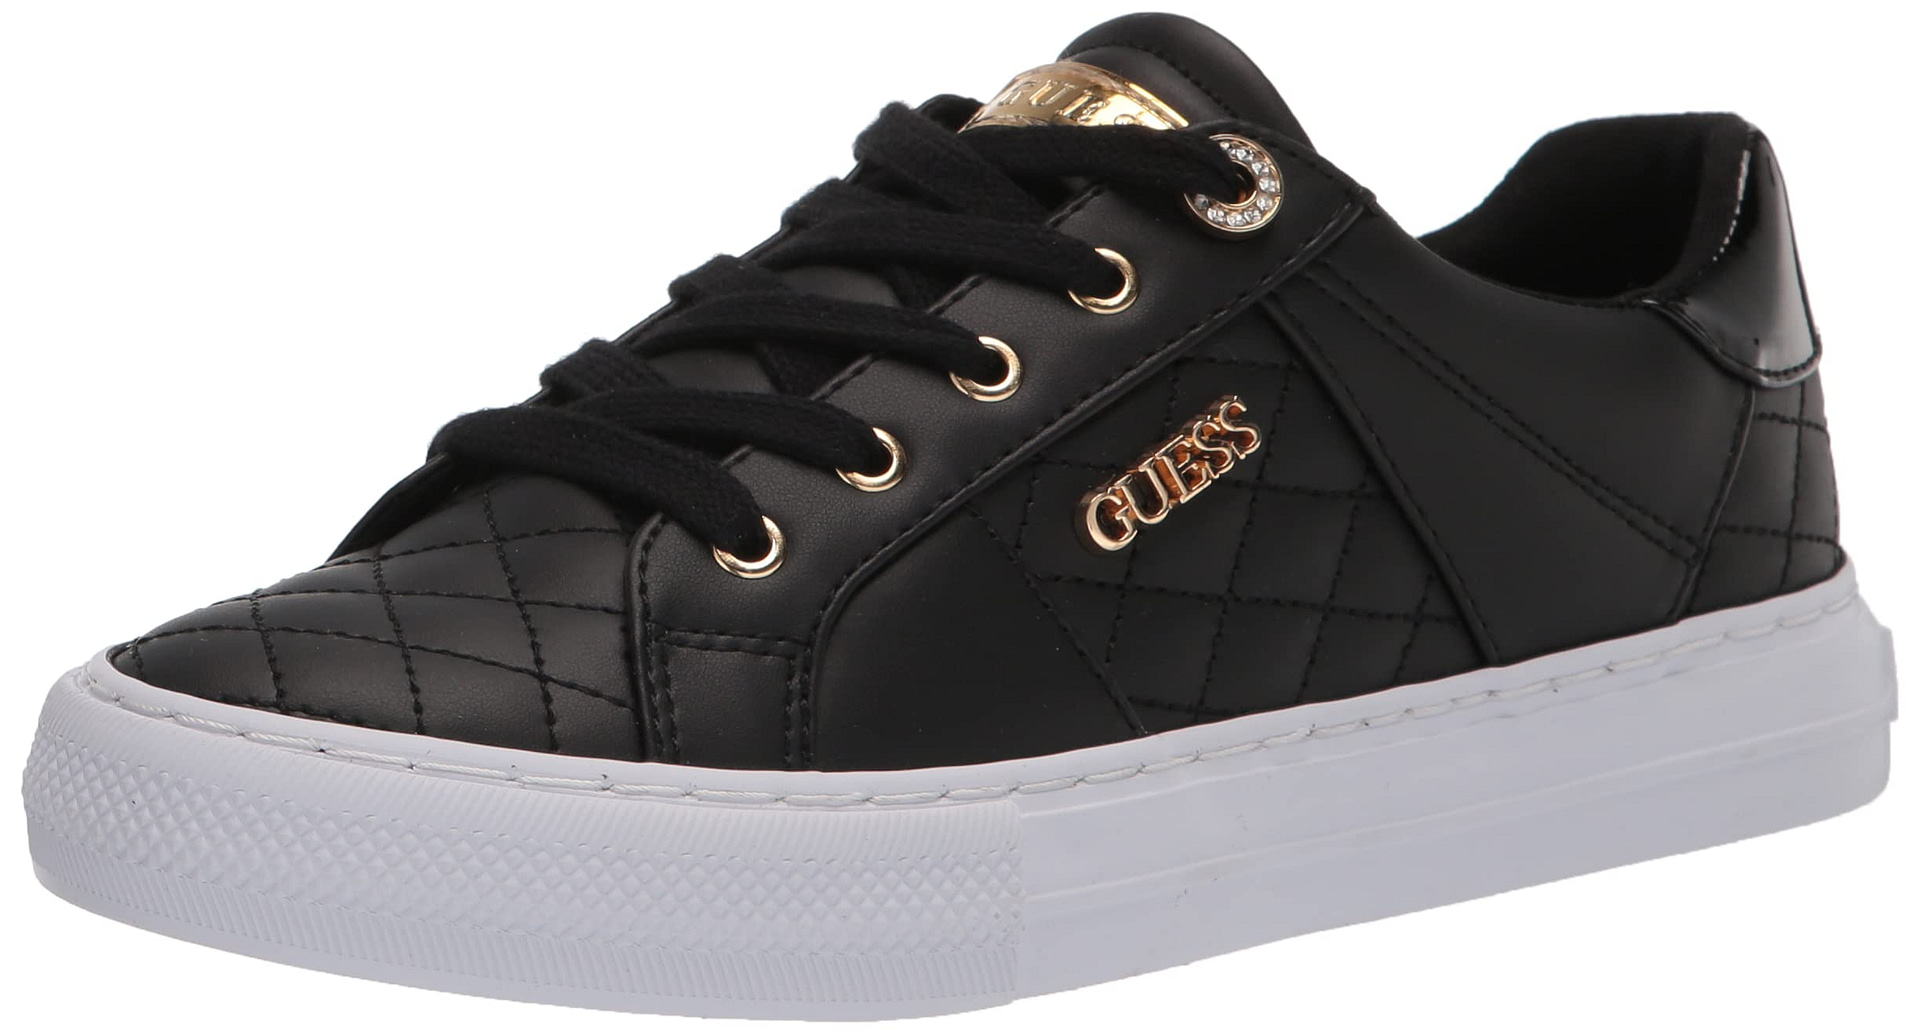 Find the Best Deals on GUESS Women's Loven Sneakers at Walmart - Top Choice for Quality and Style